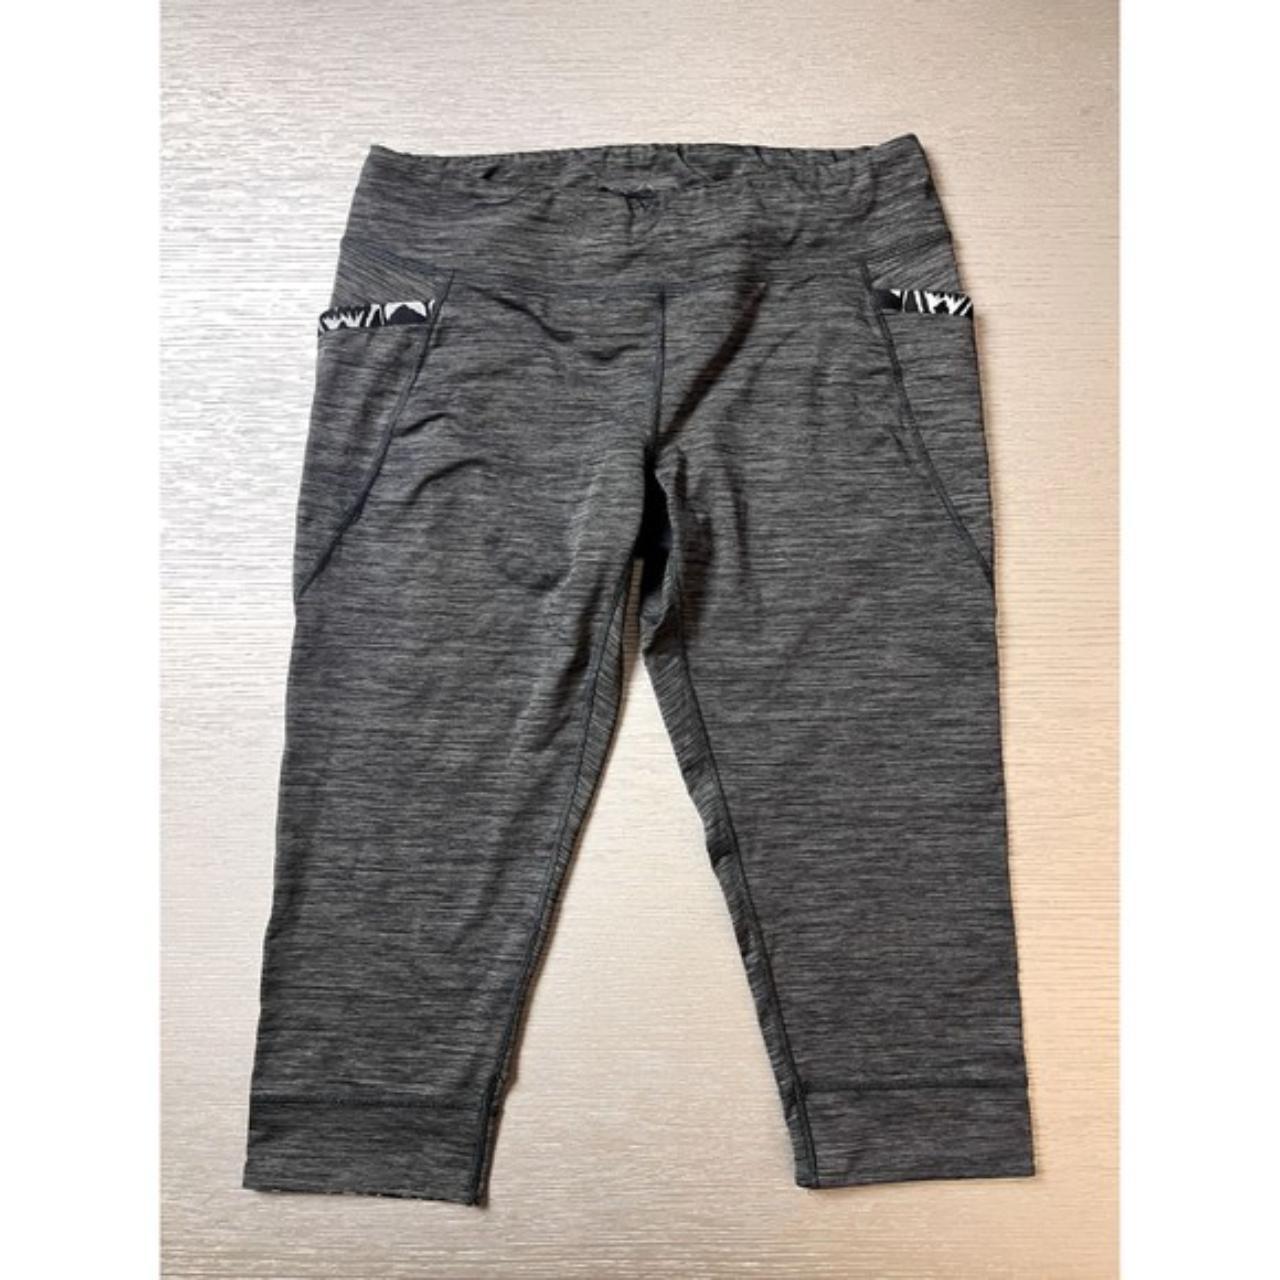 Patagonia Womens Size Small Diversifly Capris - Depop